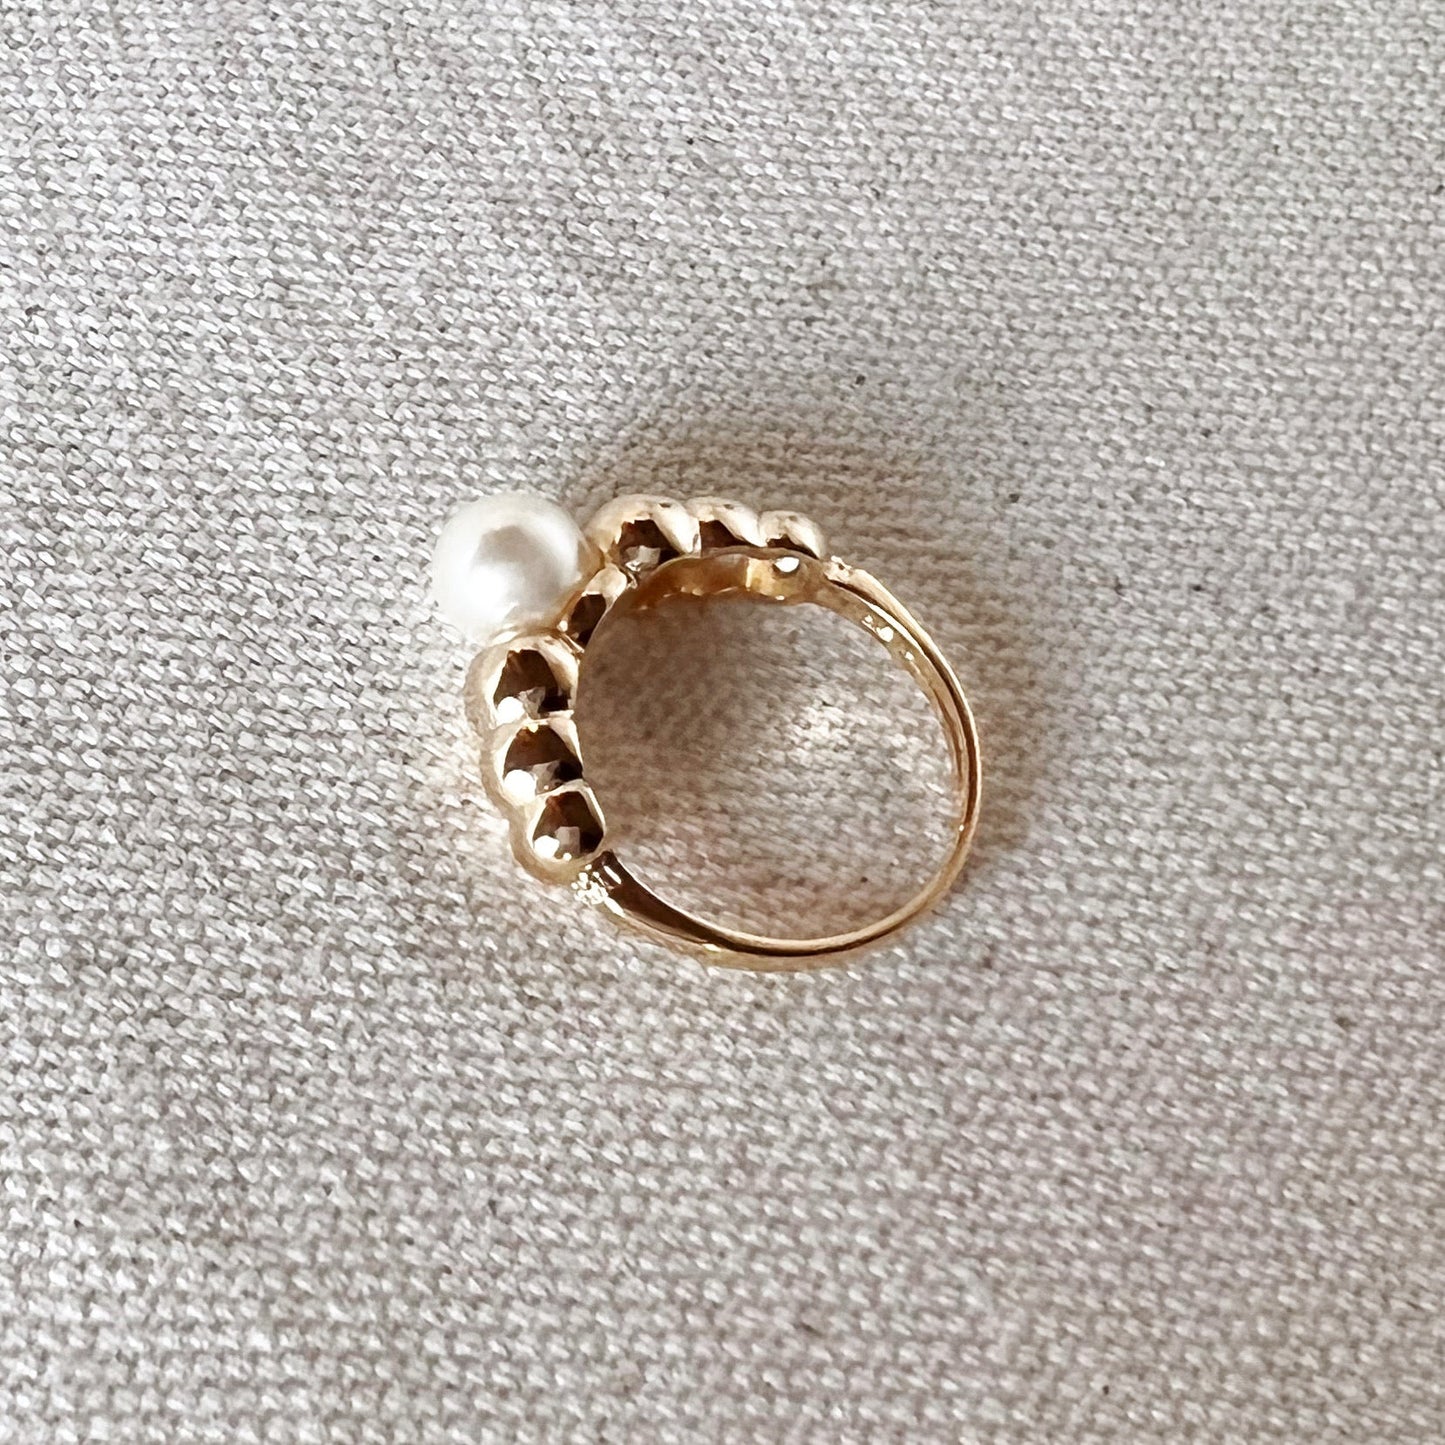 GoldFi 18k Gold Filled Beads and Pearl Ring